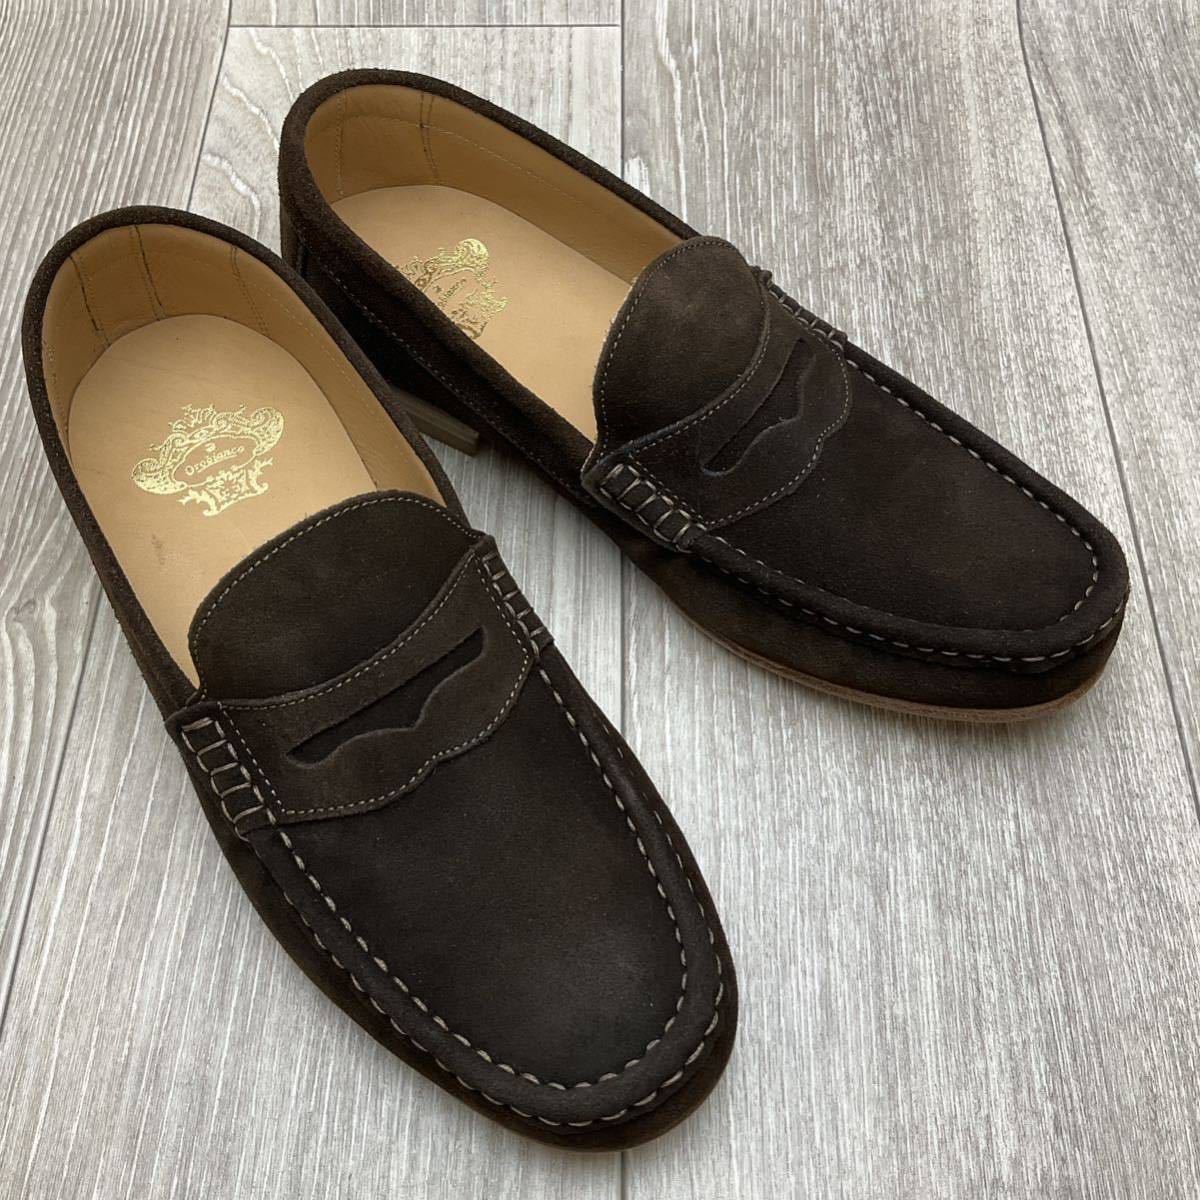 Orobianco* suede Loafer * size 40(25.0cm)* dark brown * Orobianco gentleman leather shoes Italy made slip-on shoes 